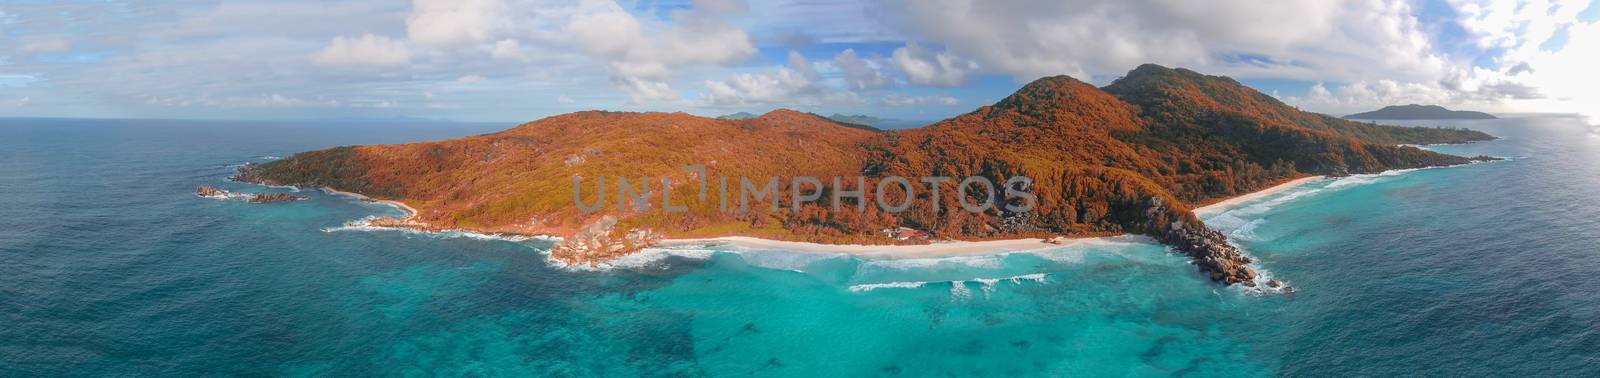 La Digue, Seychelles Island. Amazing aerial view of beach and oc by jovannig